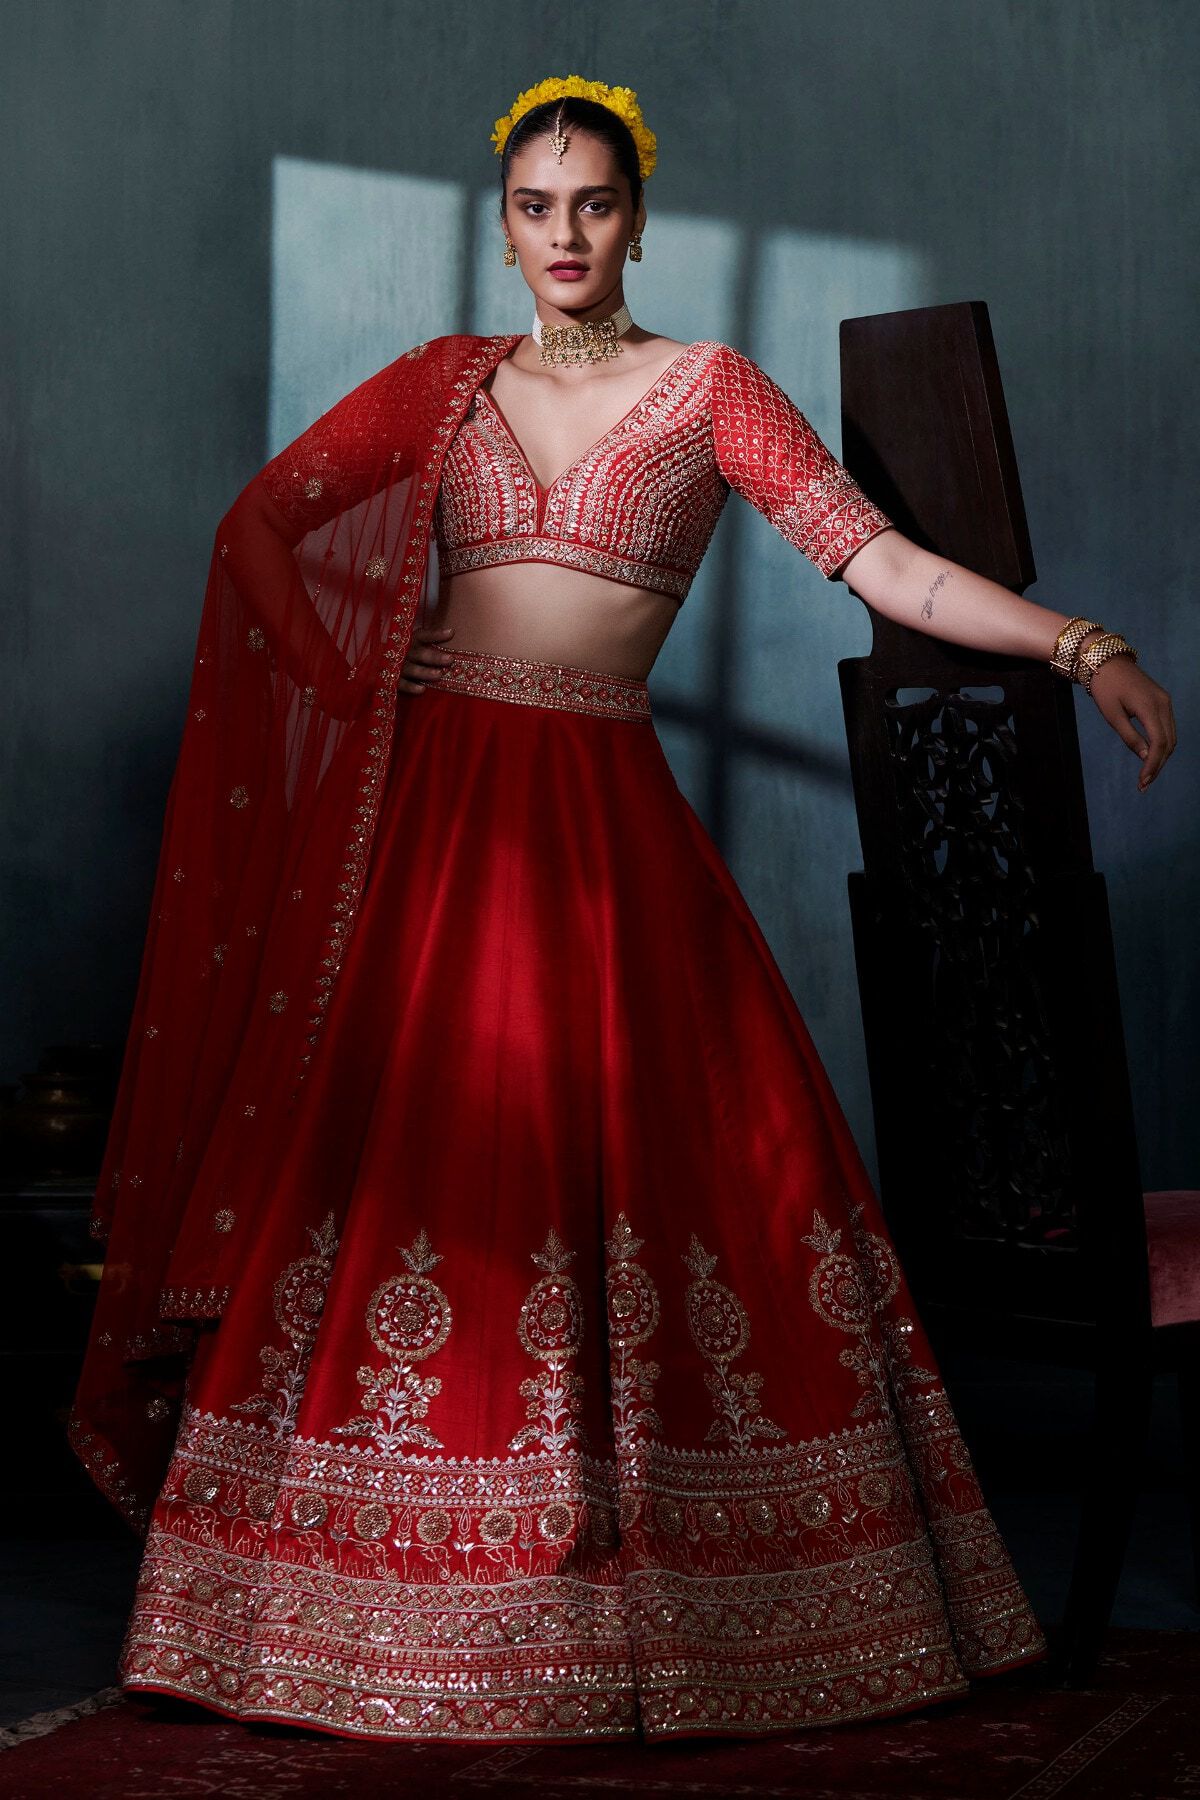 Buy Persian Red Lehenga Choli In Velvet With Multi Colored Hand Embroidered  Mughal Kalis And Floral Motifs Online - Kalki Fashion